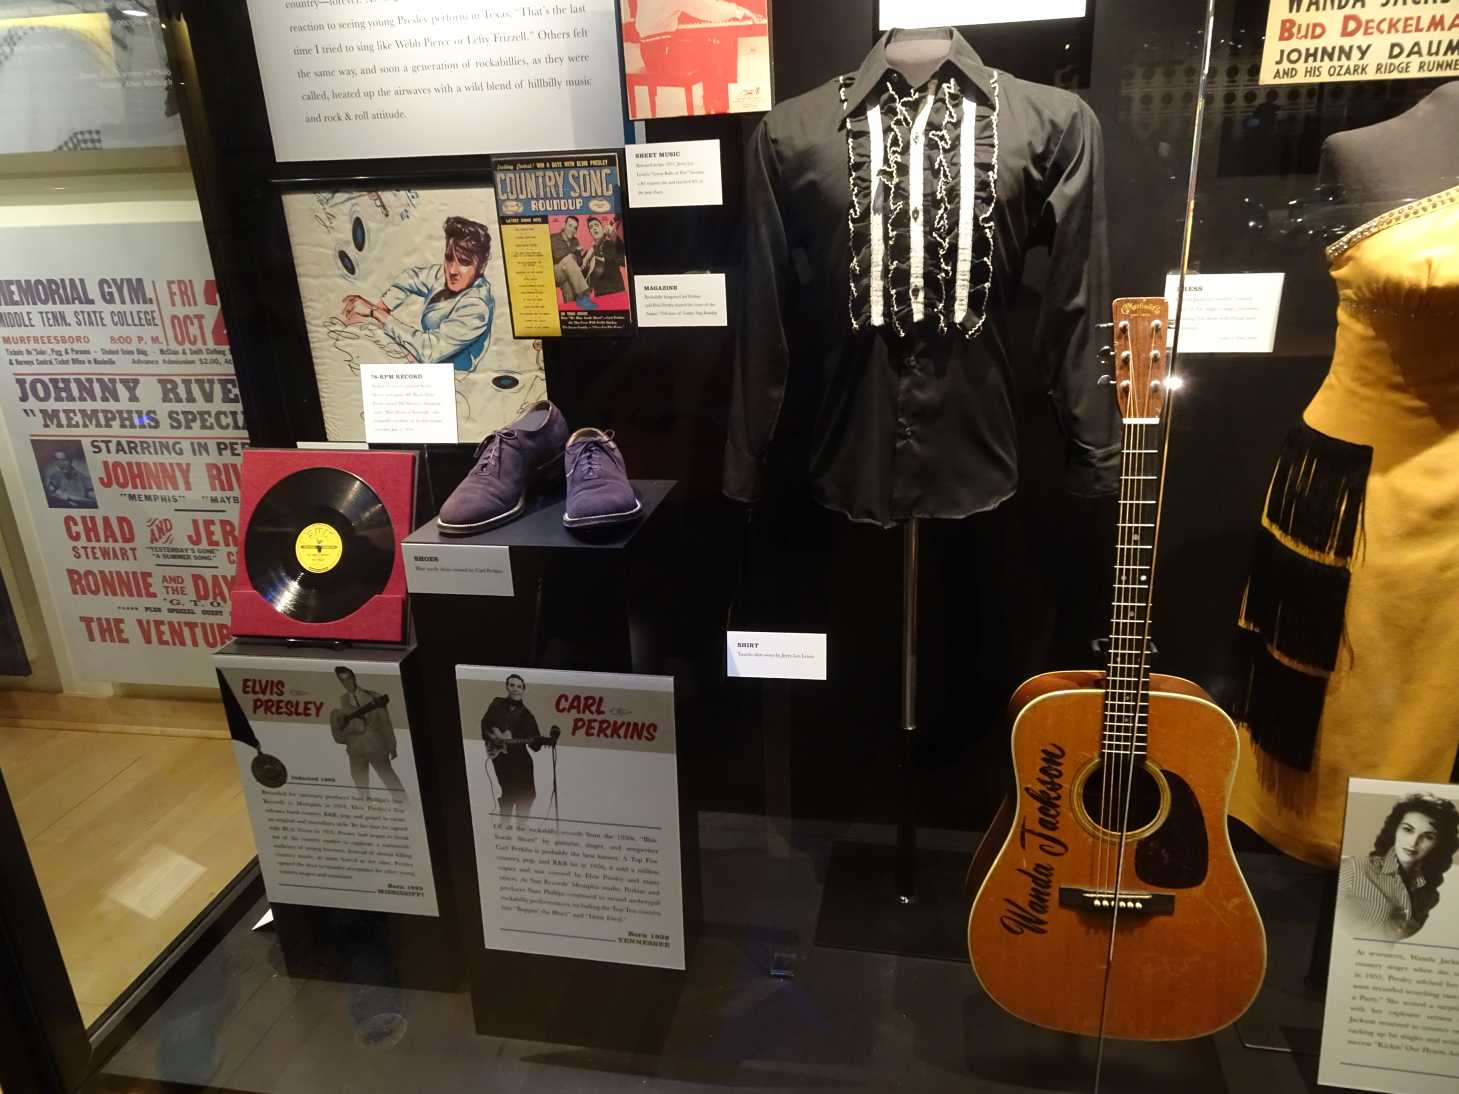 Carl Perkins in der Country Music Hall of Fame